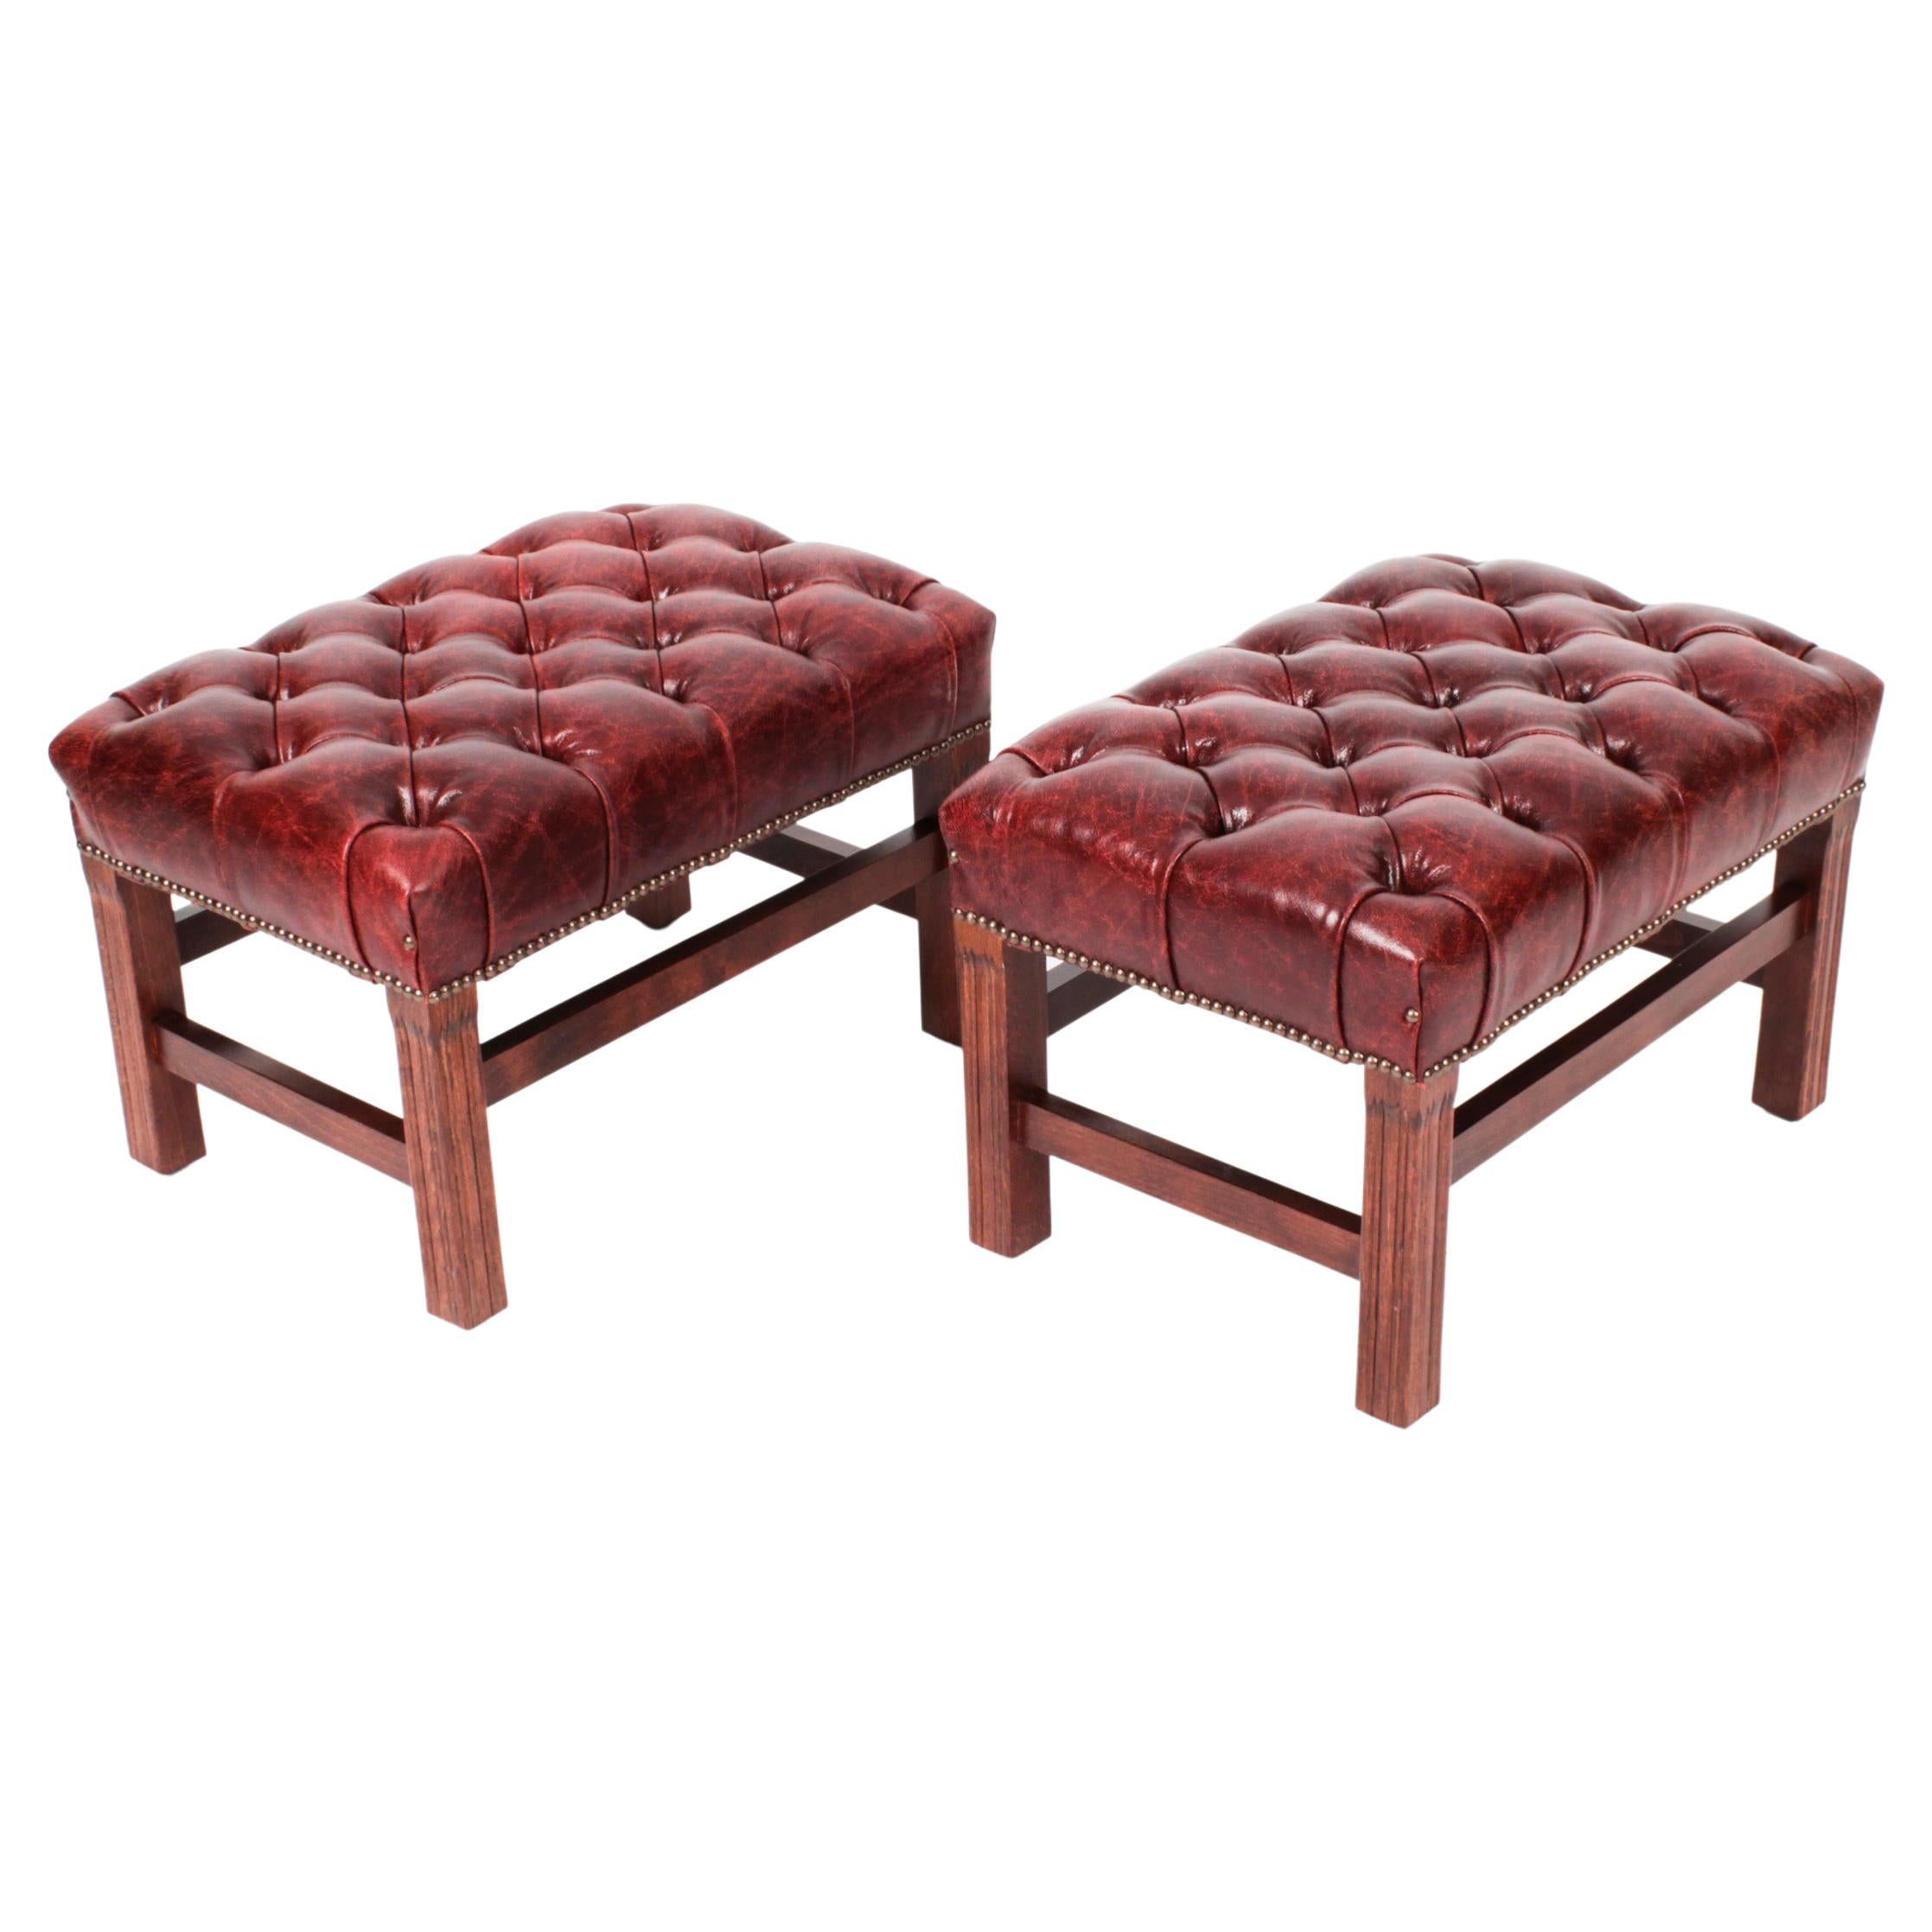 Bespoke Pair Buttoned Leather Stools Murano Port 20th C For Sale